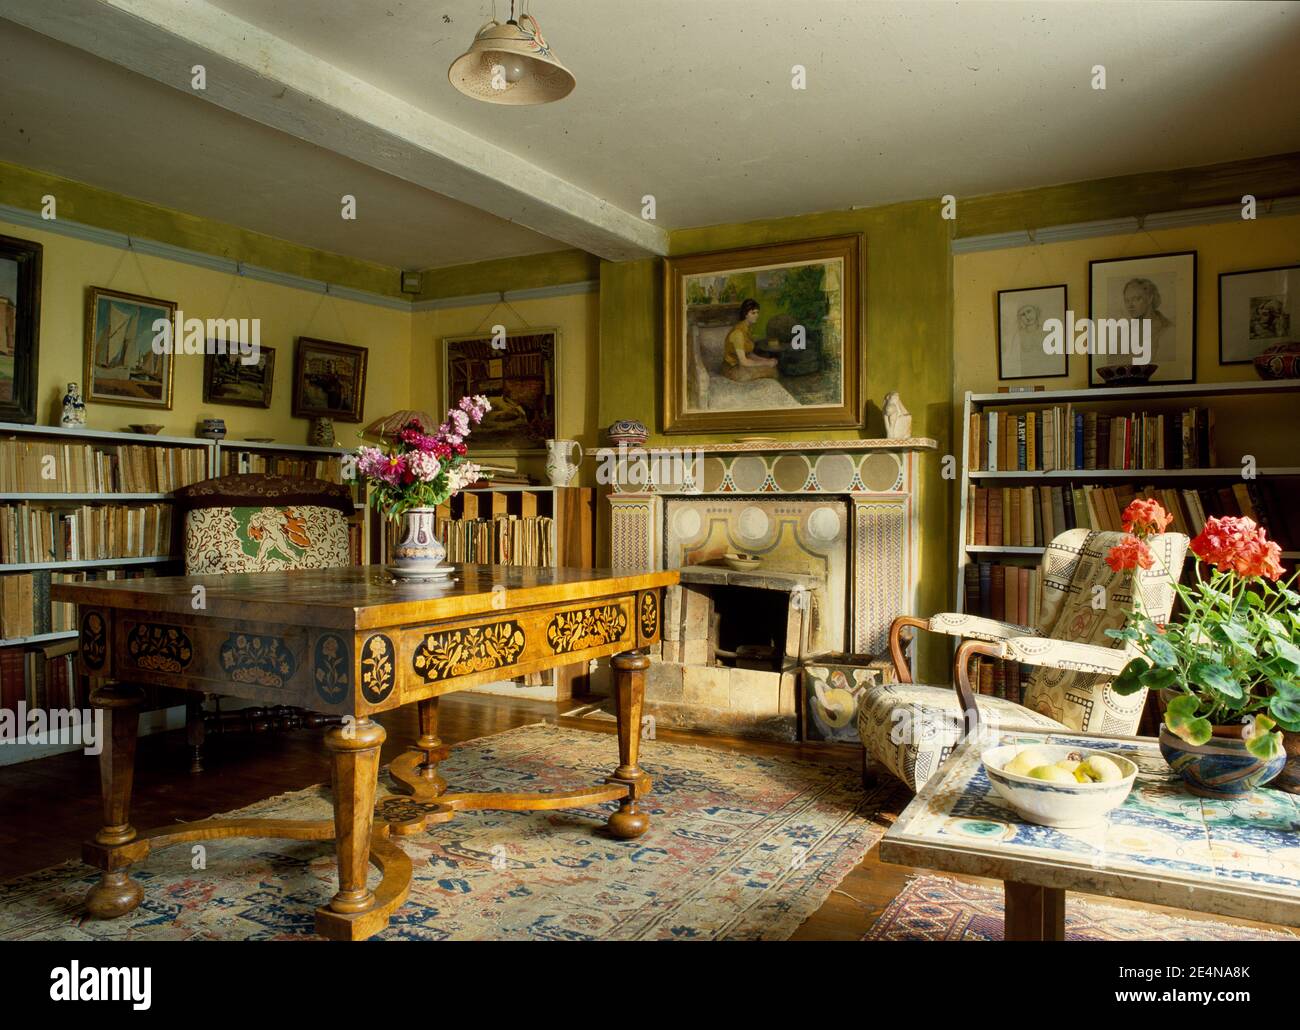 Charleston farmhouse owned by Bloomsbury group Stock Photo - Alamy